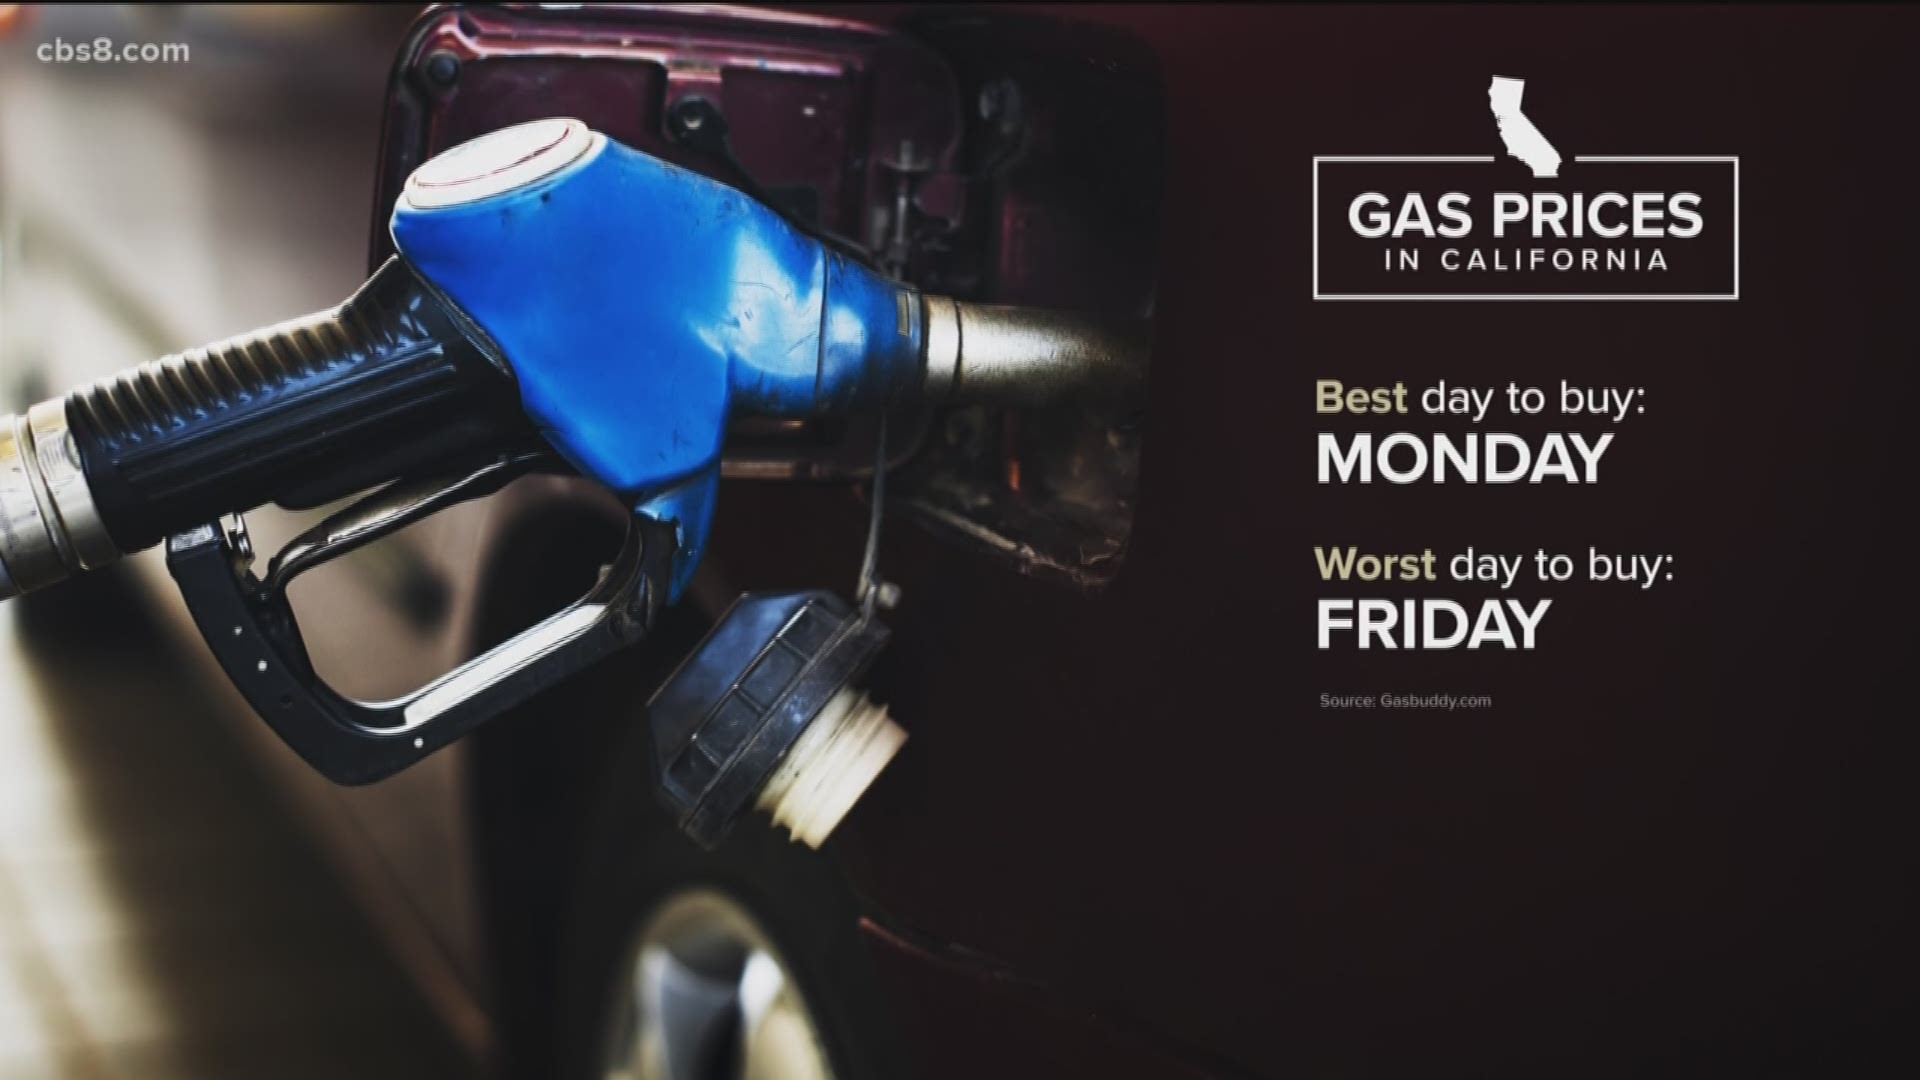 Want to save money at the pump? Fill up on Monday morning on your way to work.